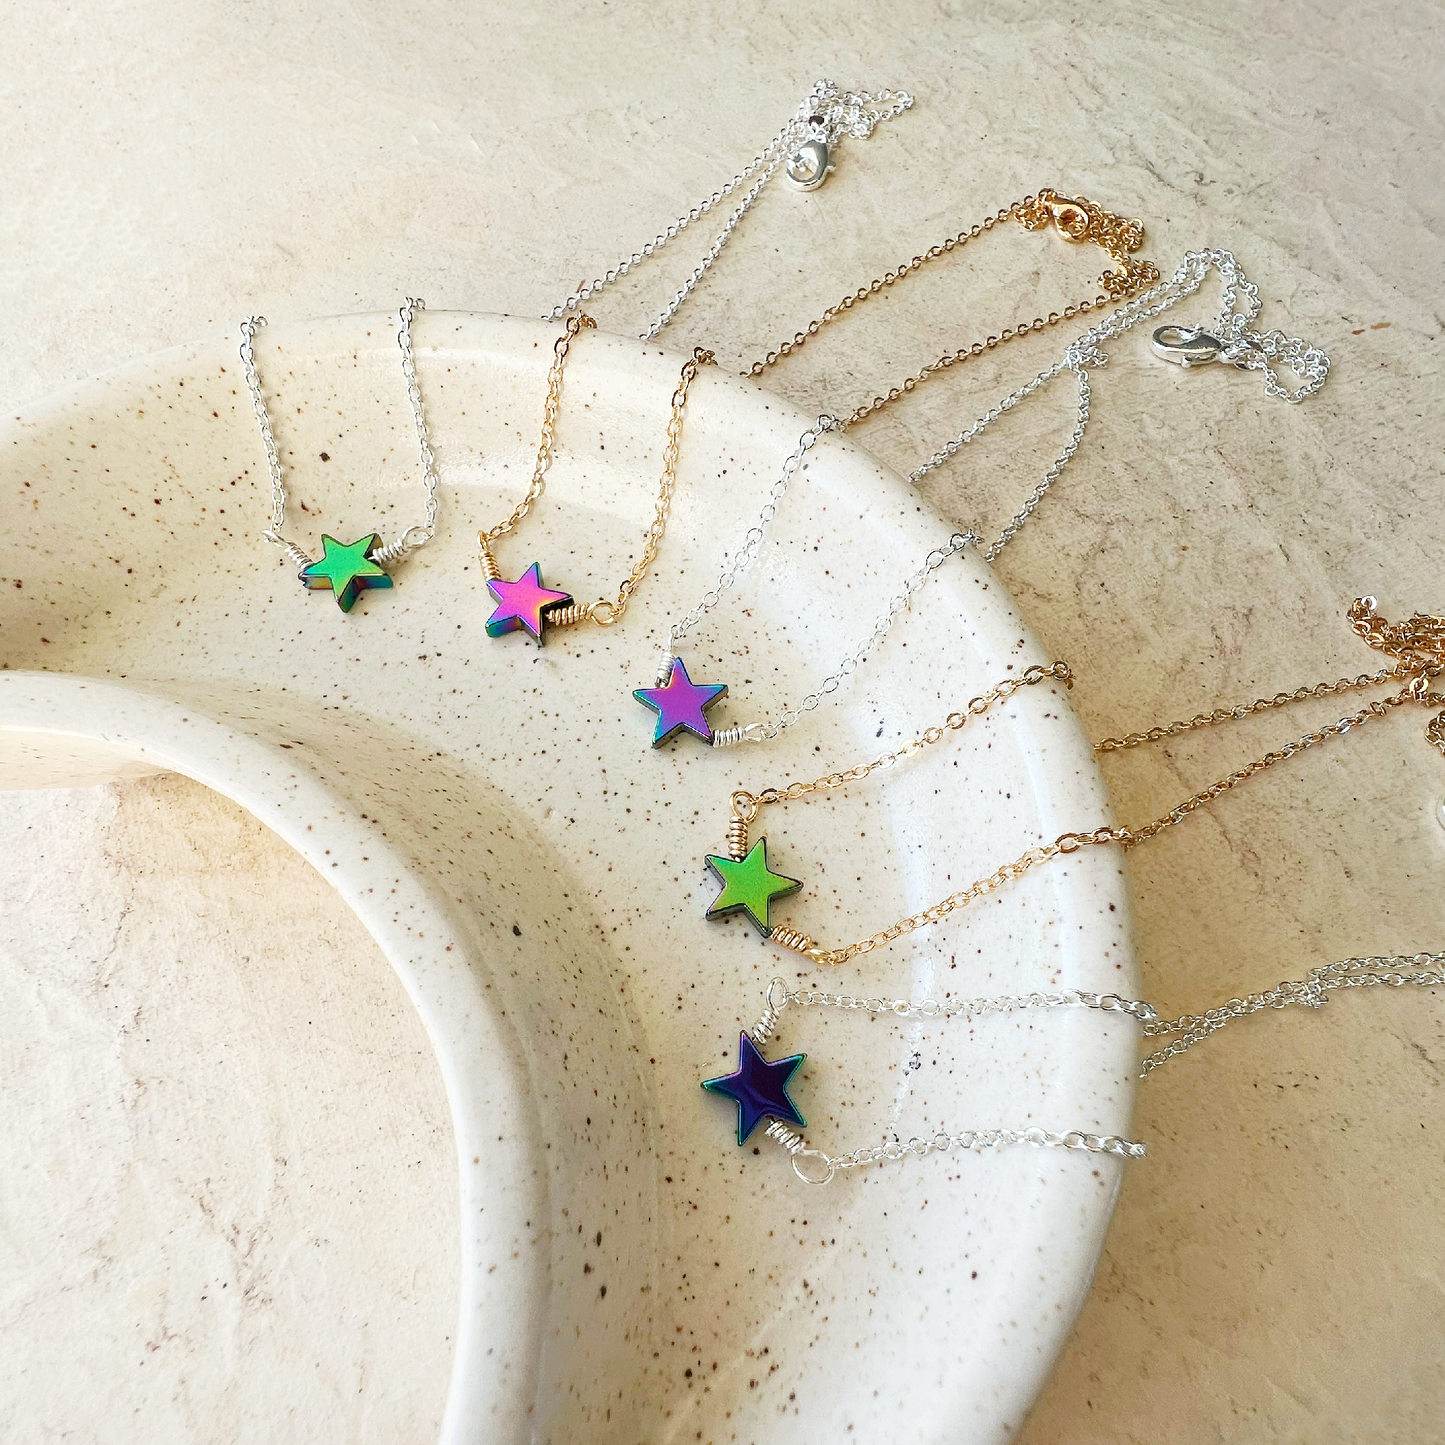 Shooting Star Necklace Gold